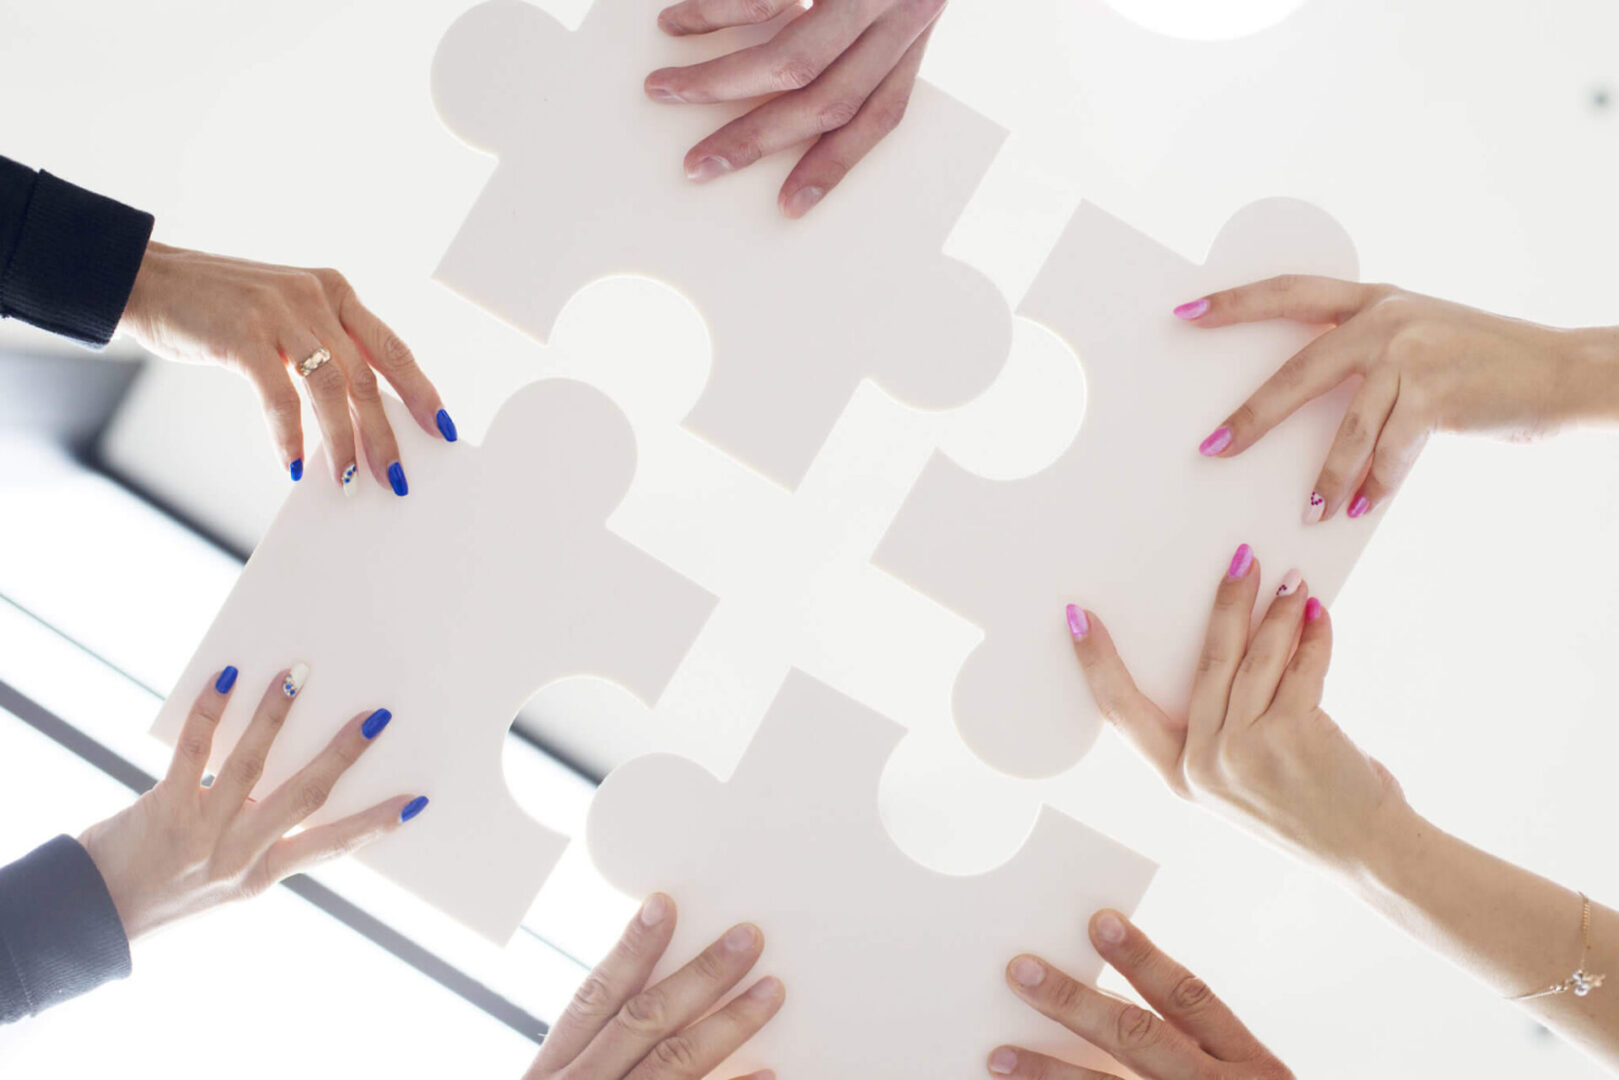 Hands of Business People Holding White Puzzle